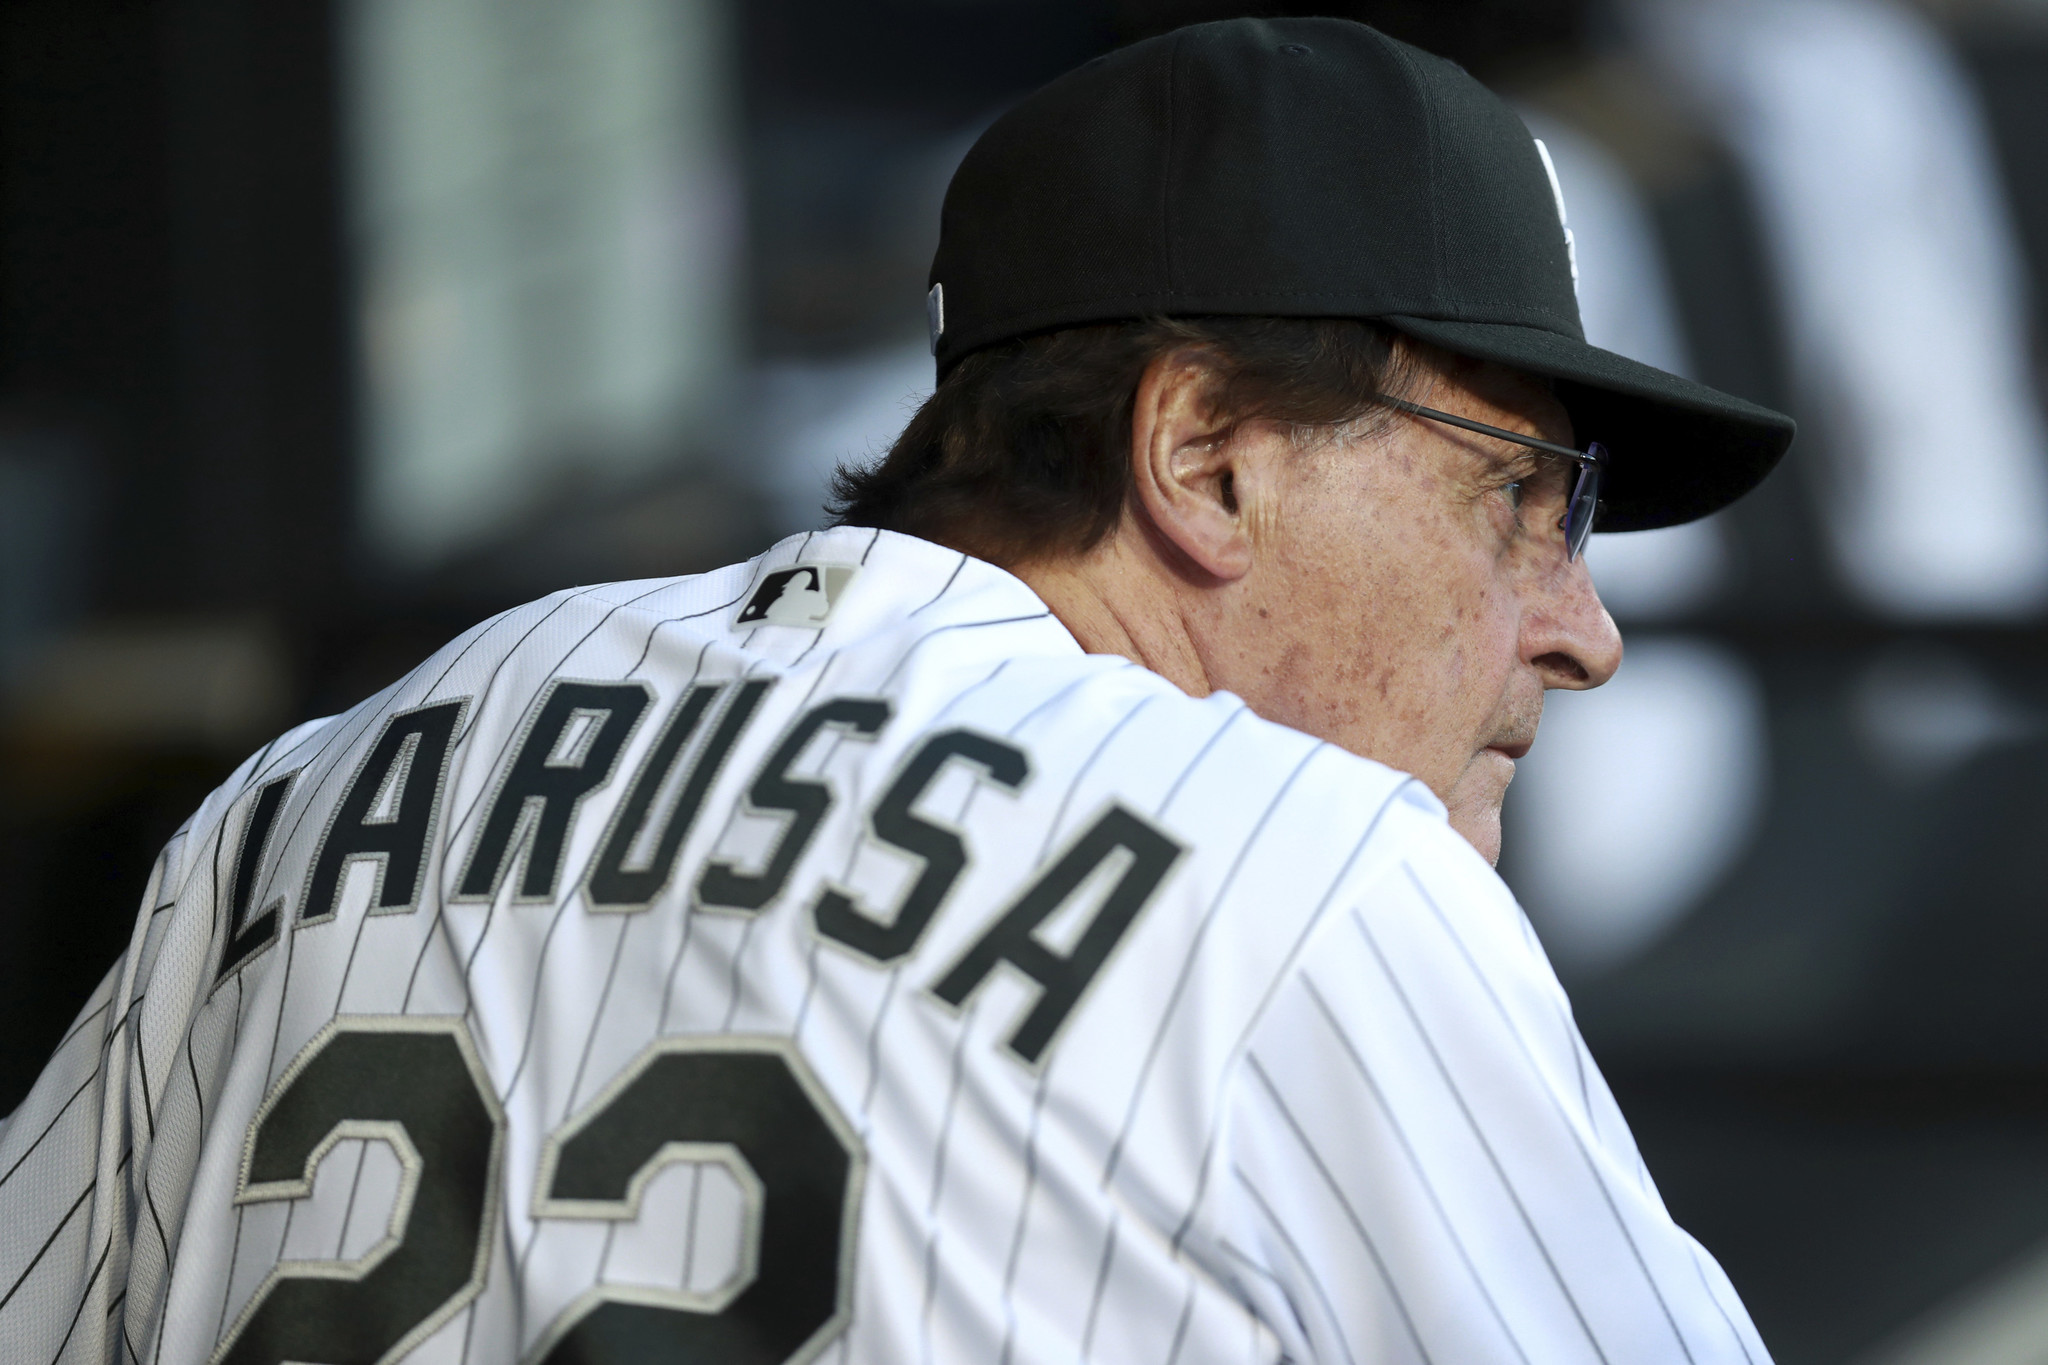 La Russa steps down as White Sox manager over health issues